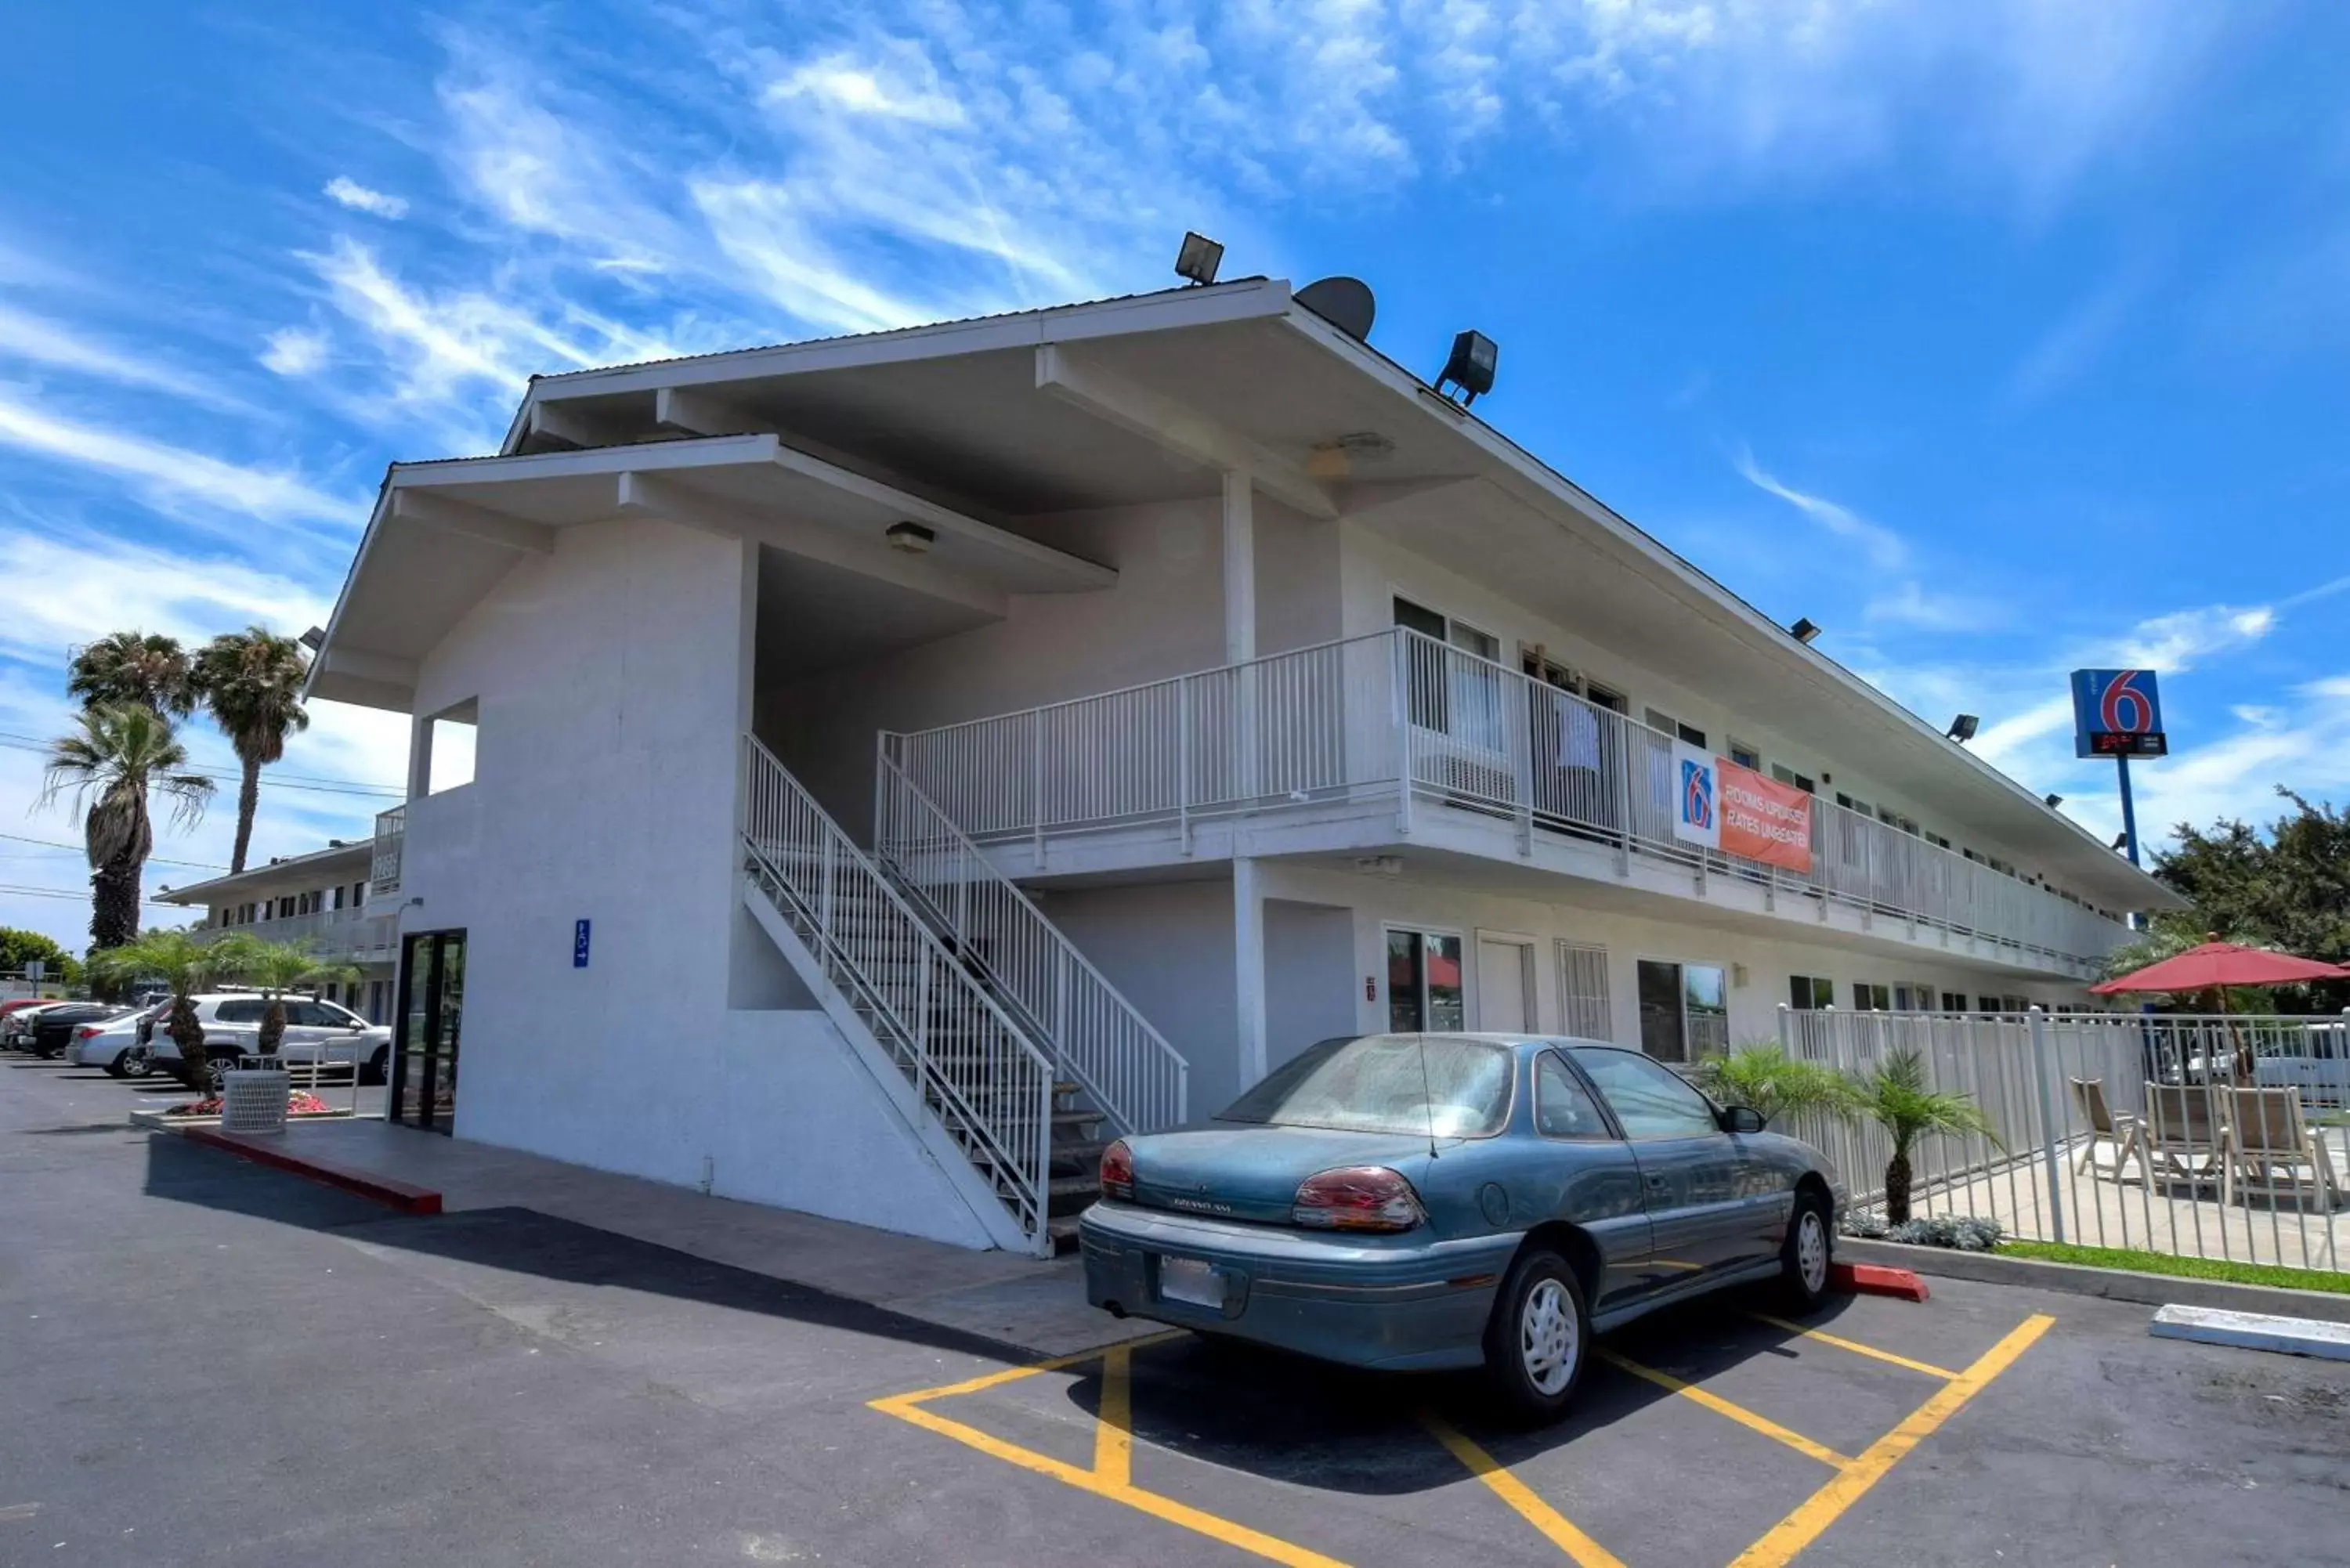 Property building, Facade/Entrance in Motel 6-Westminster, CA - South - Long Beach Area